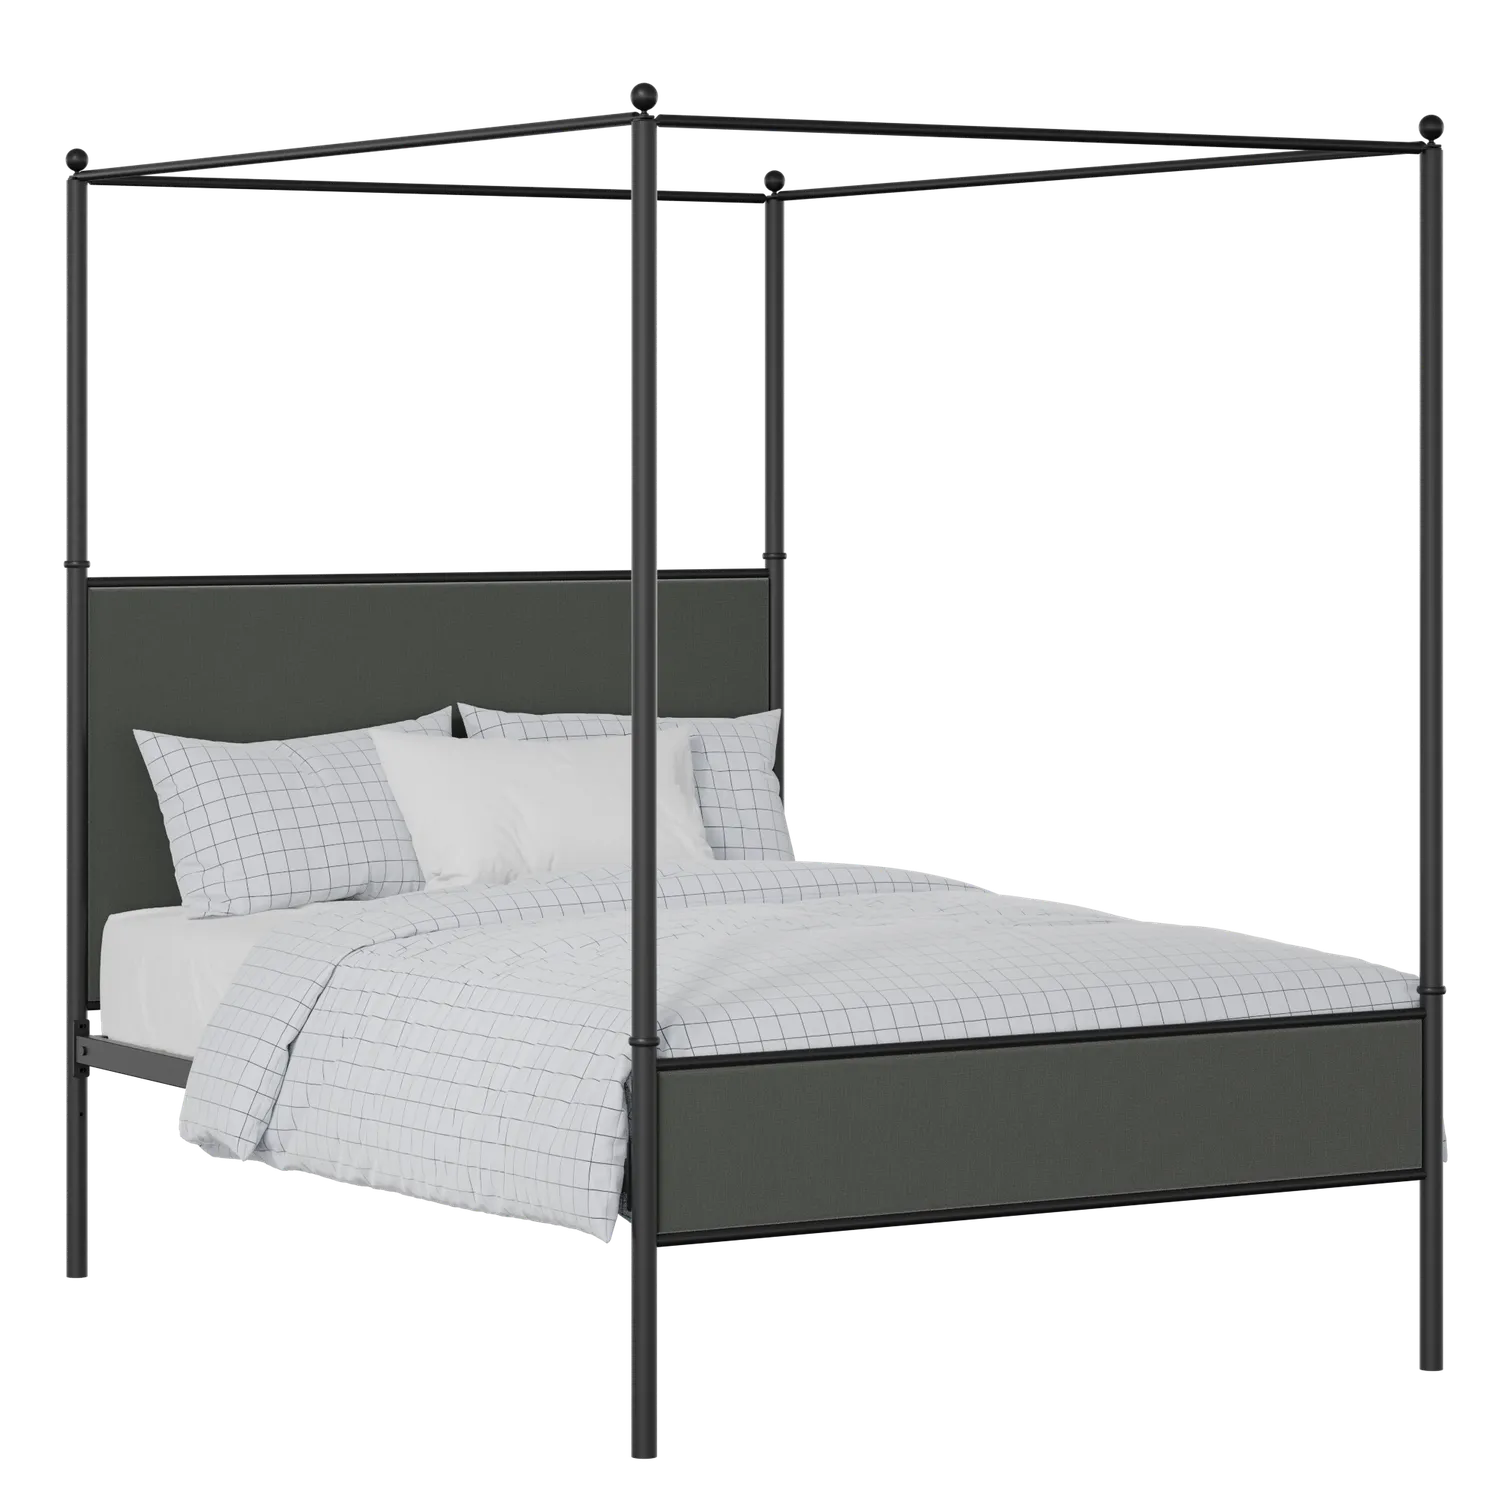 Reims Slim iron/metal upholstered bed in black with iron fabric